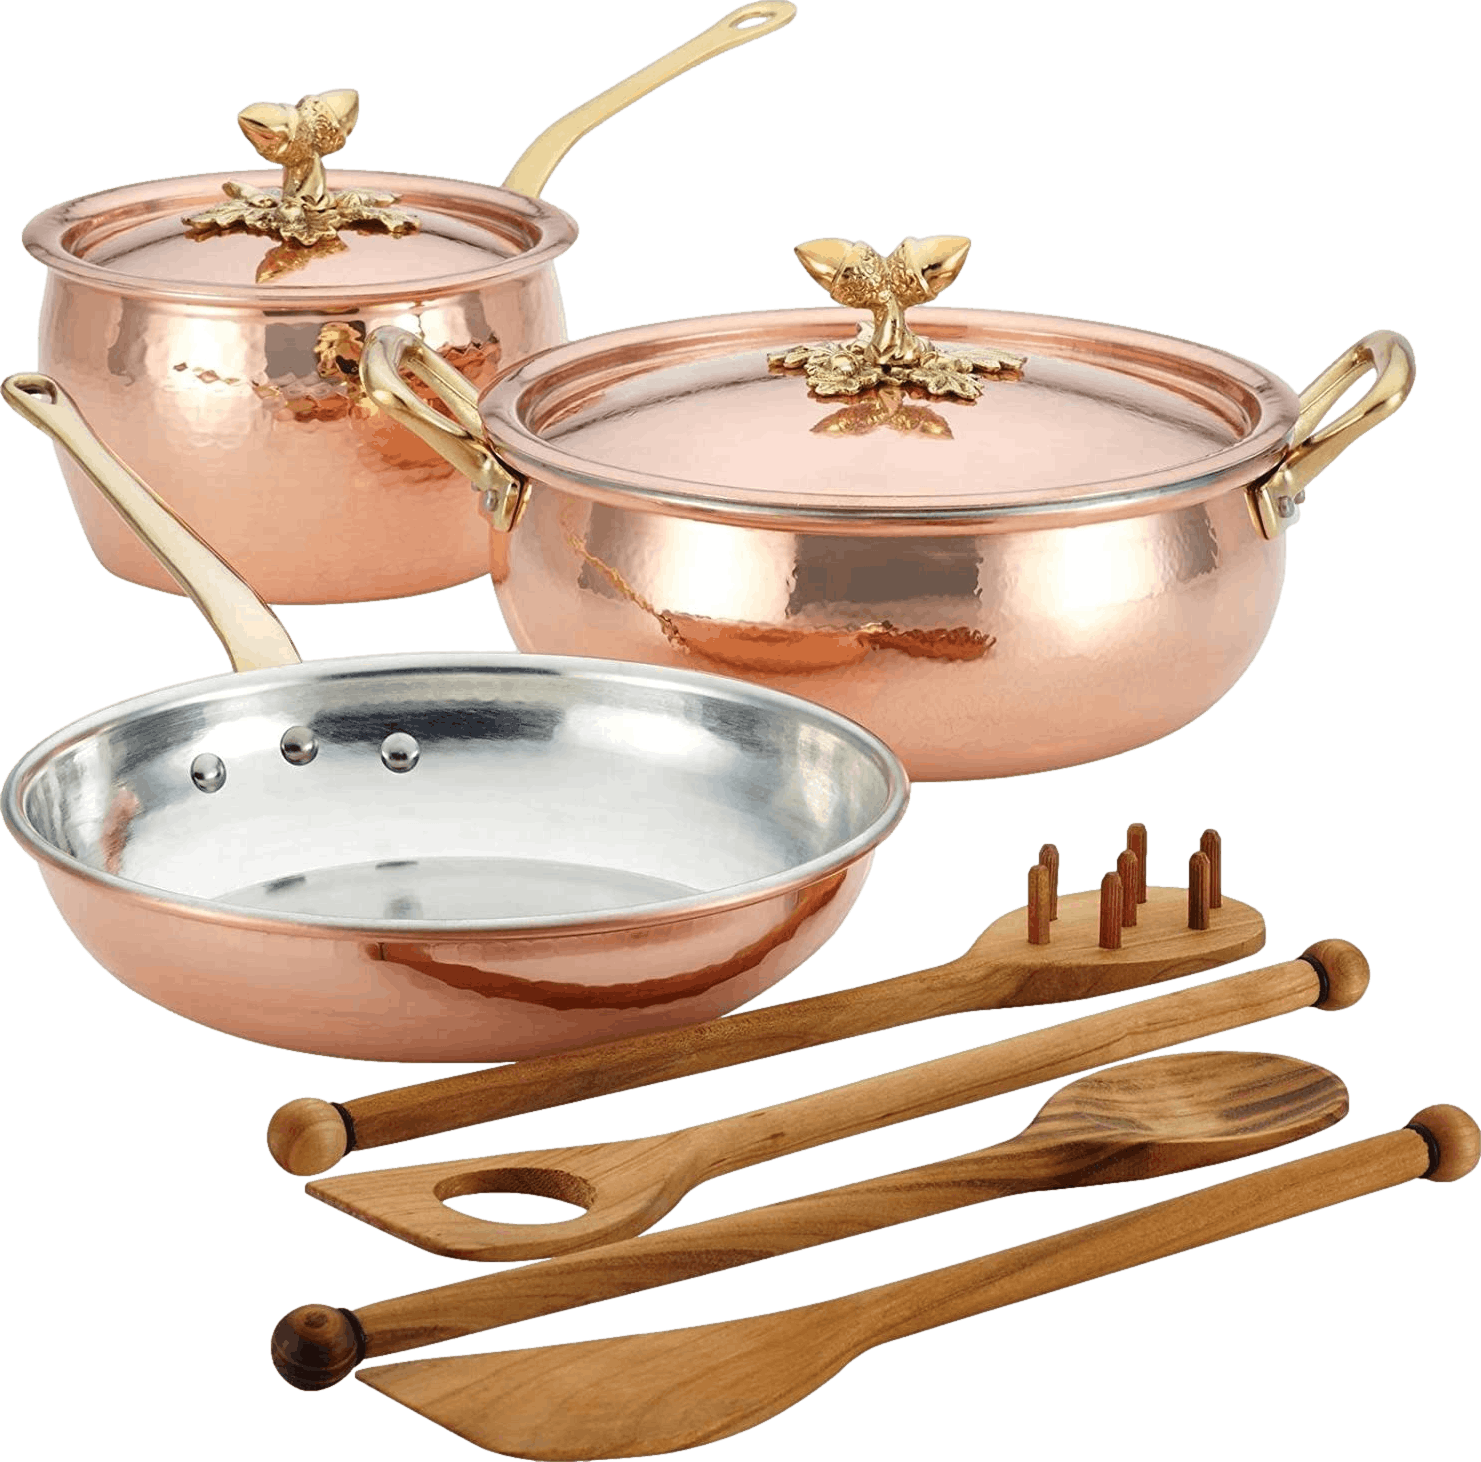 Ruffoni Historia Hammered Copper 11-Piece Cookware Set with